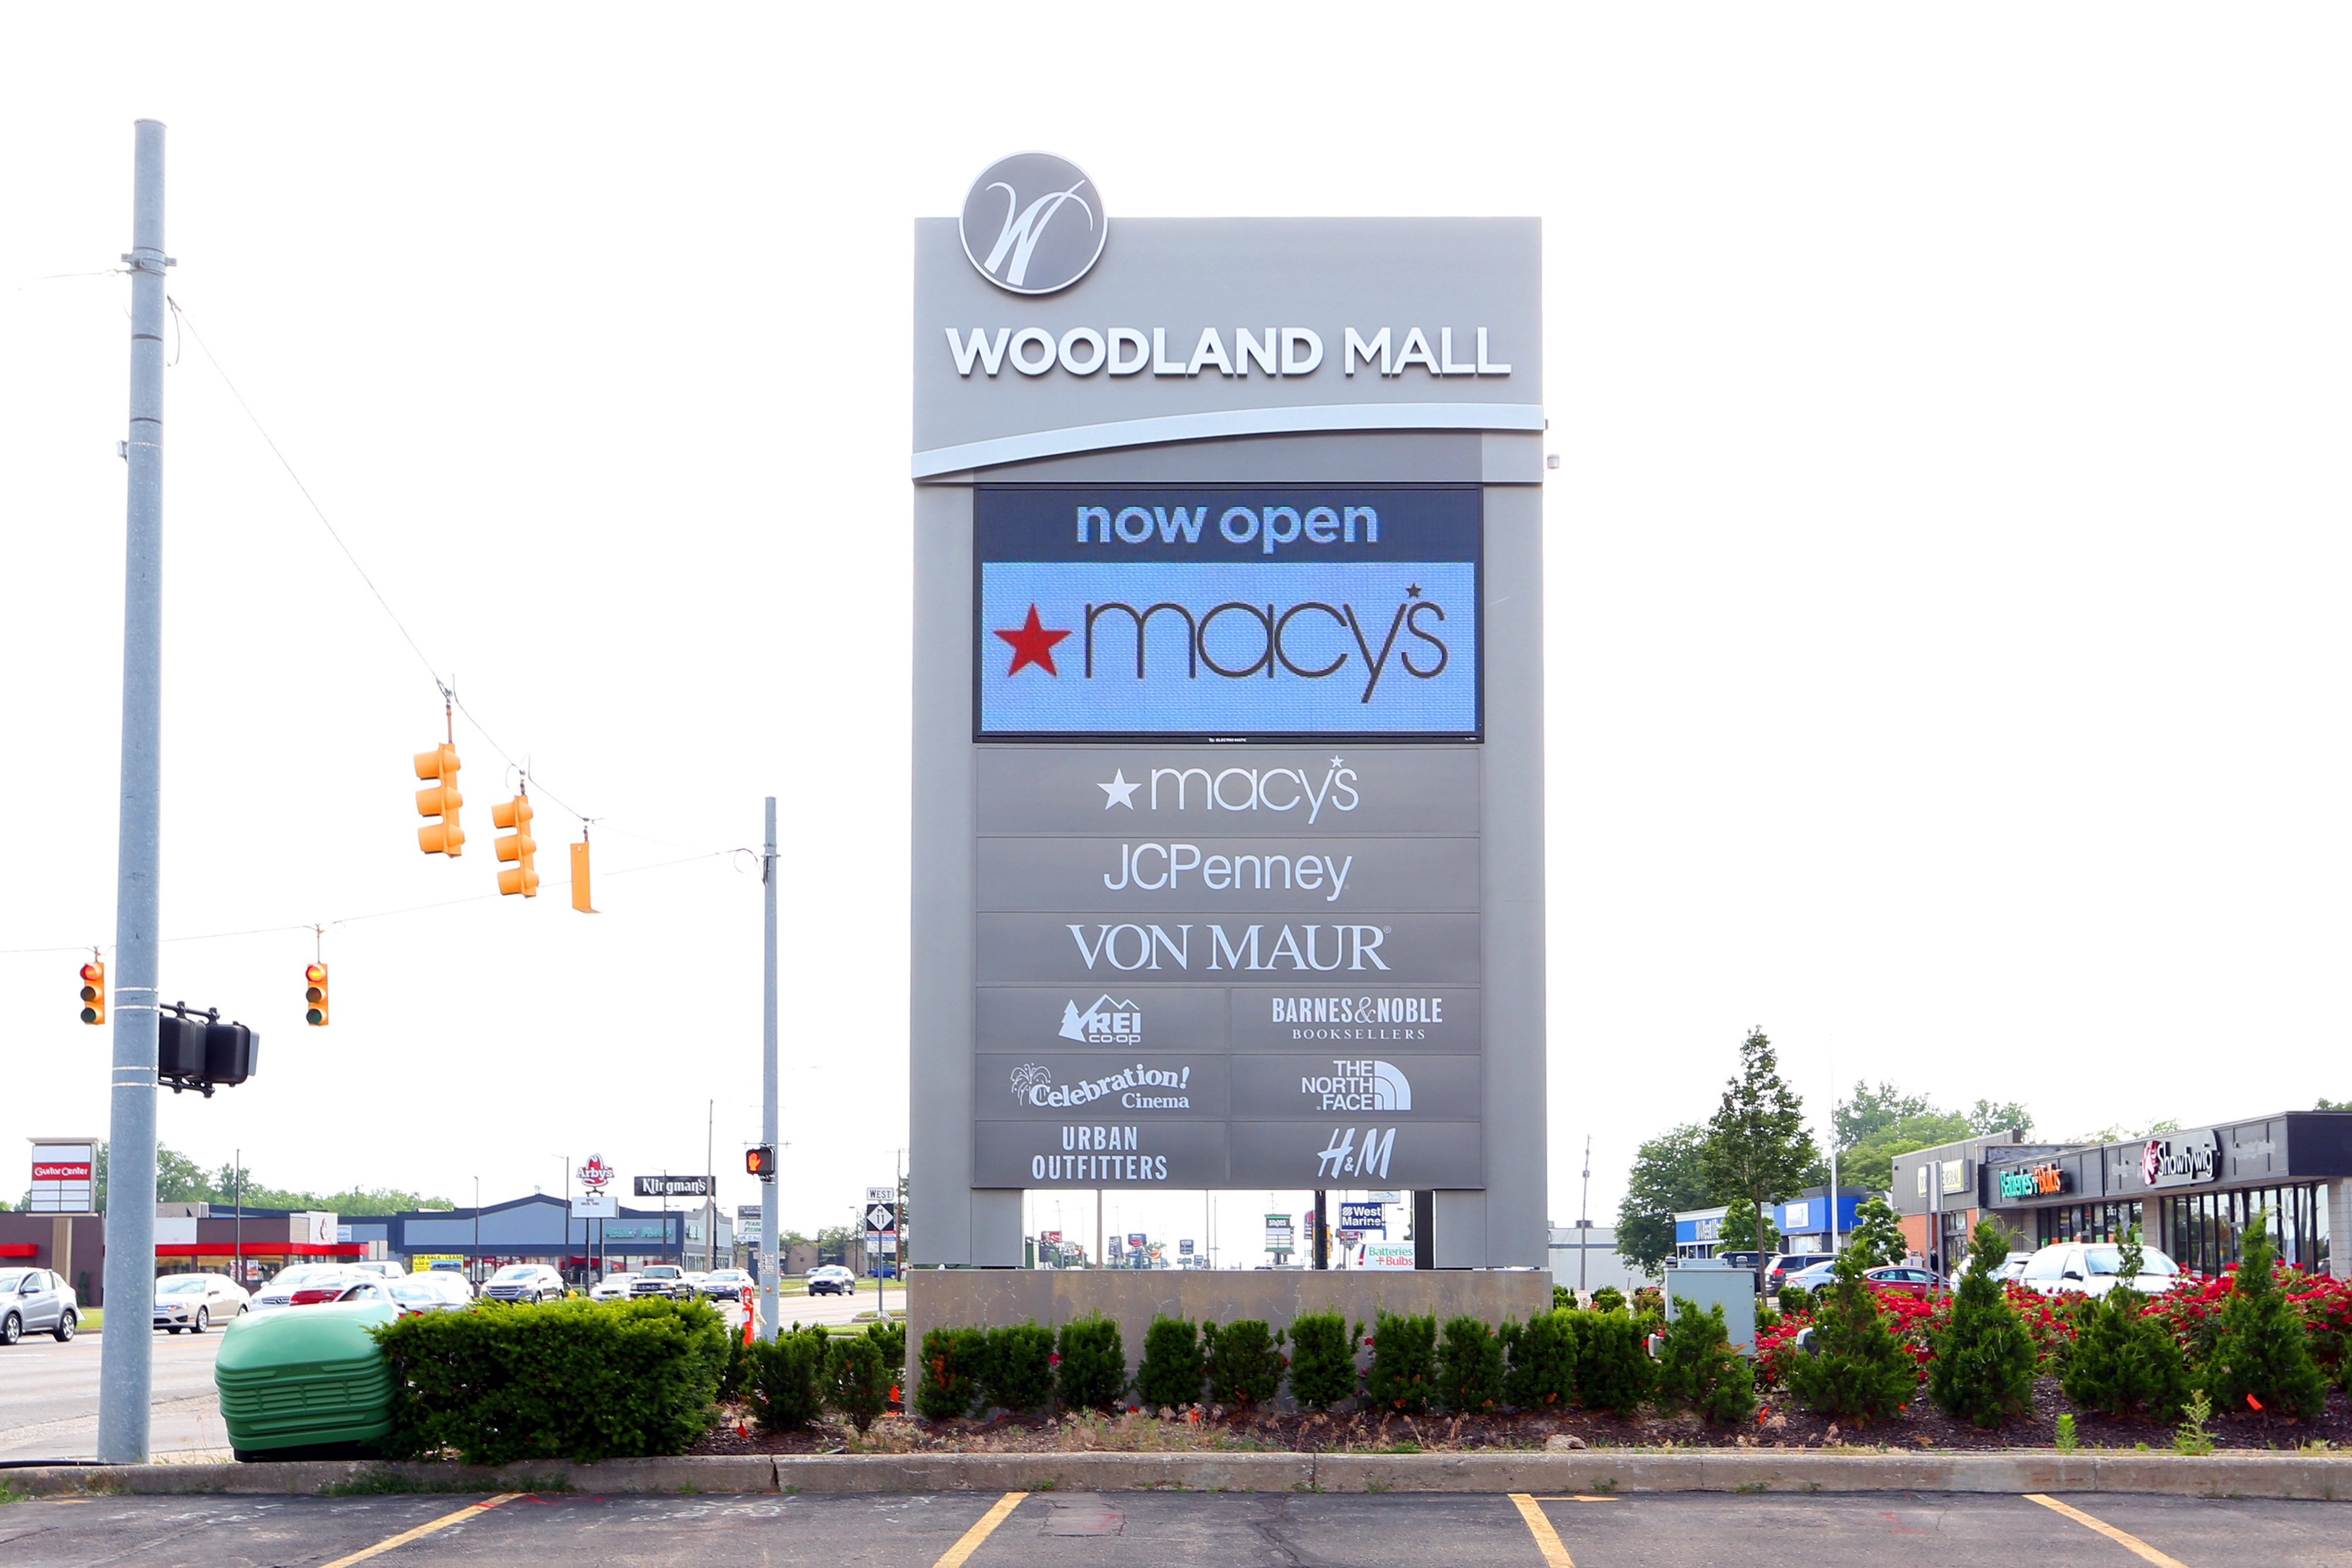 Woodland Mall uses Electro-Matic's Outdoor LED Displays in Rebrand Project